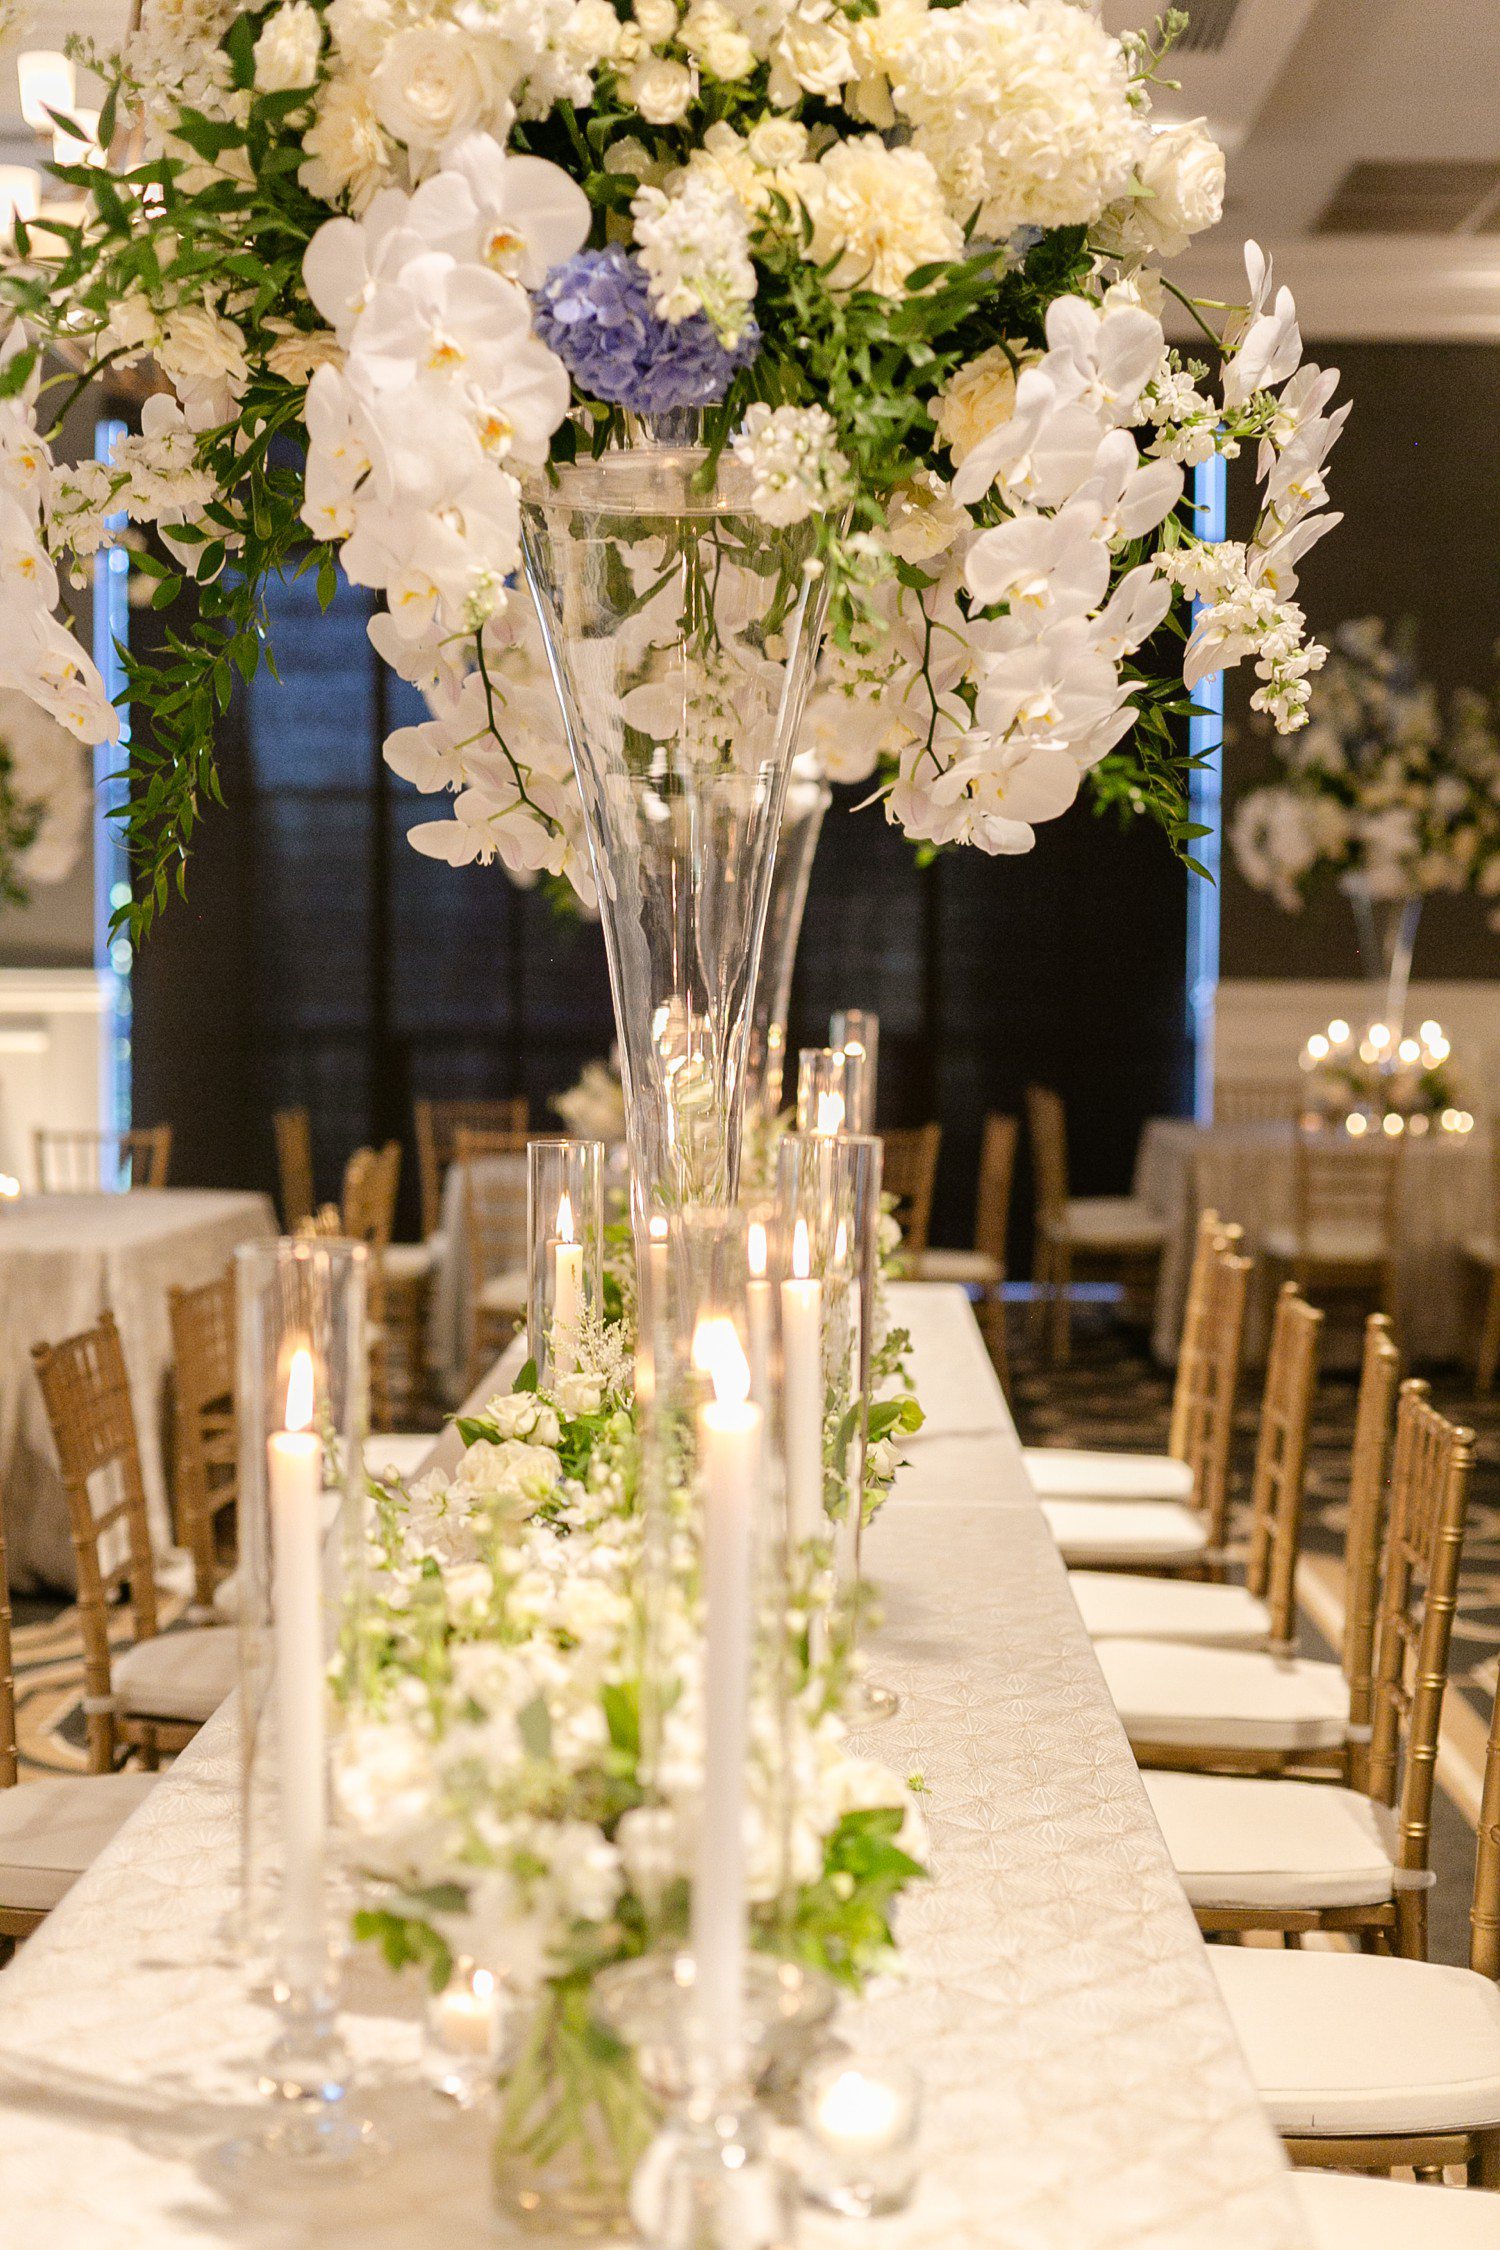 Wedding reception table with white candles and tall floral centerpieces.